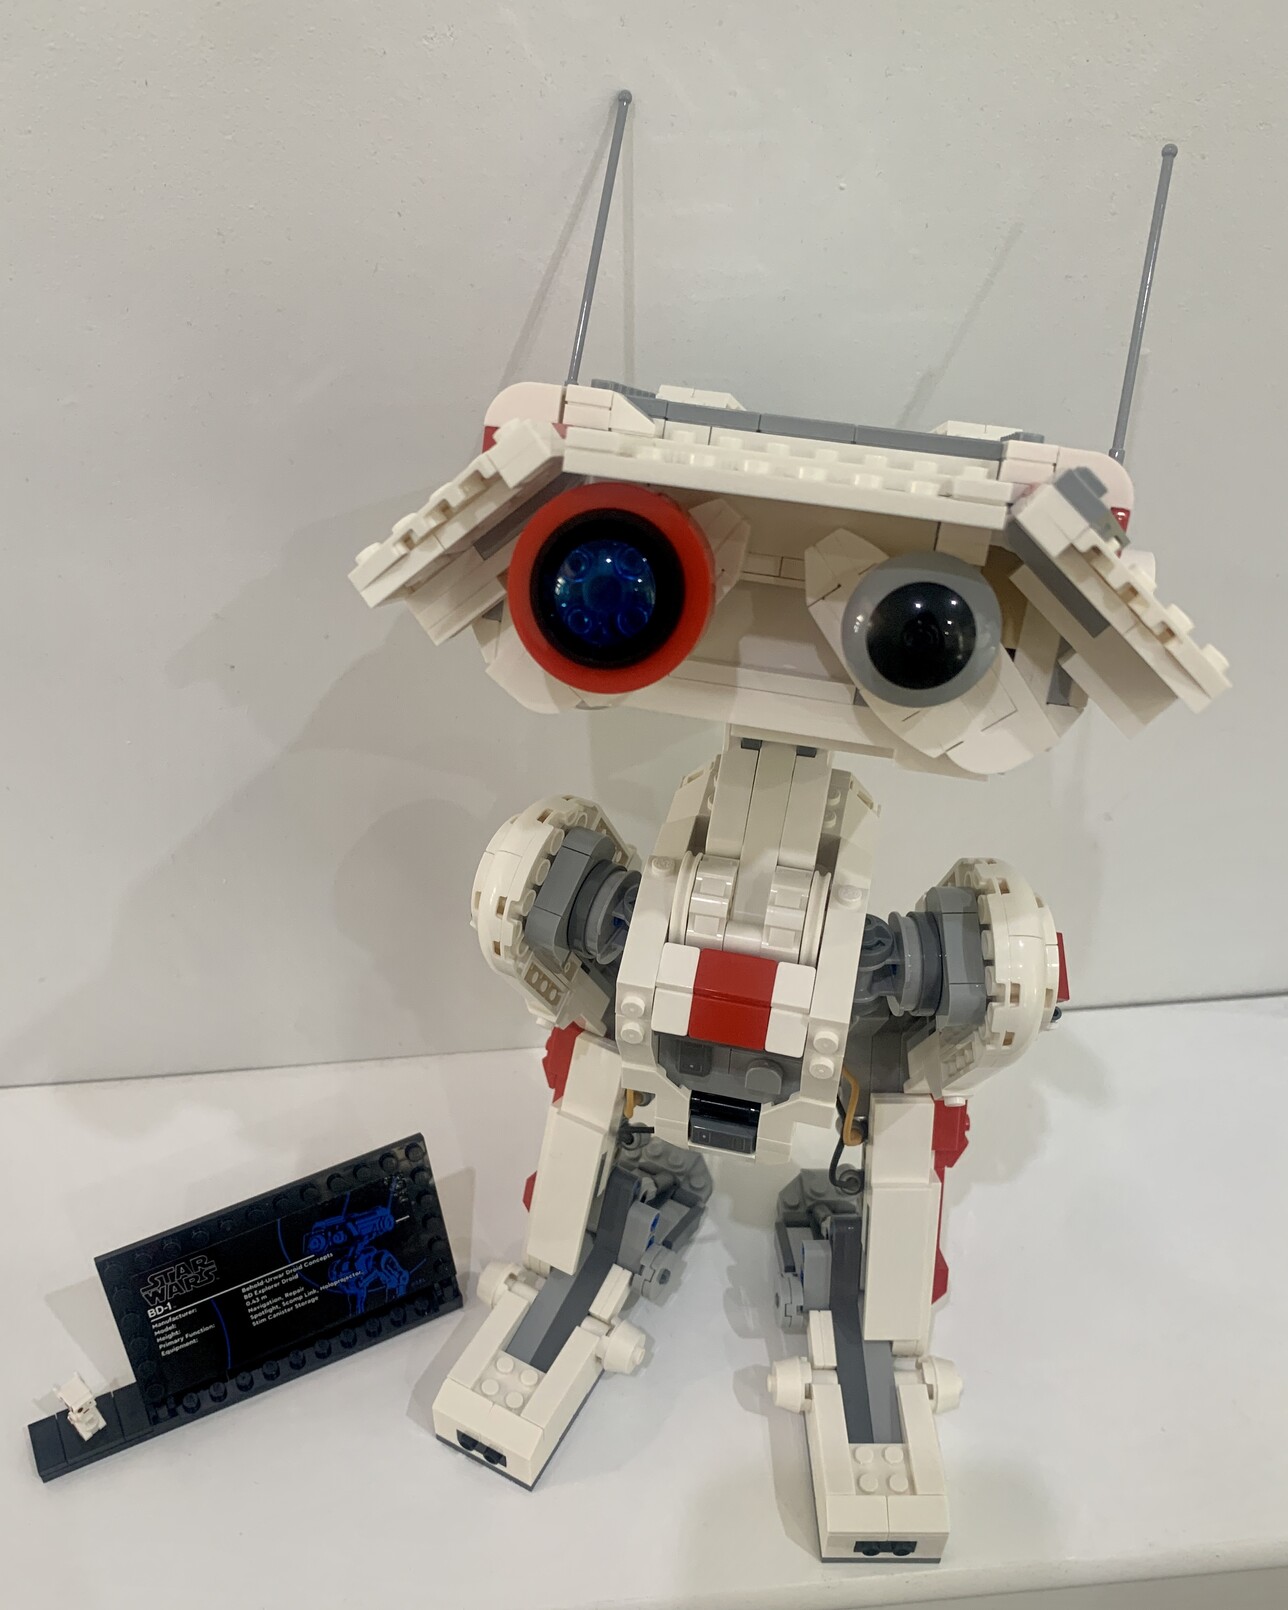 Lego BD-1. A short bipedal white, red and grey robot with an oversized head. The heads left “eye” is red while the right “eye” is grey. He has 2 antennas coming out each side of his head. His head is tiled up towards the camera